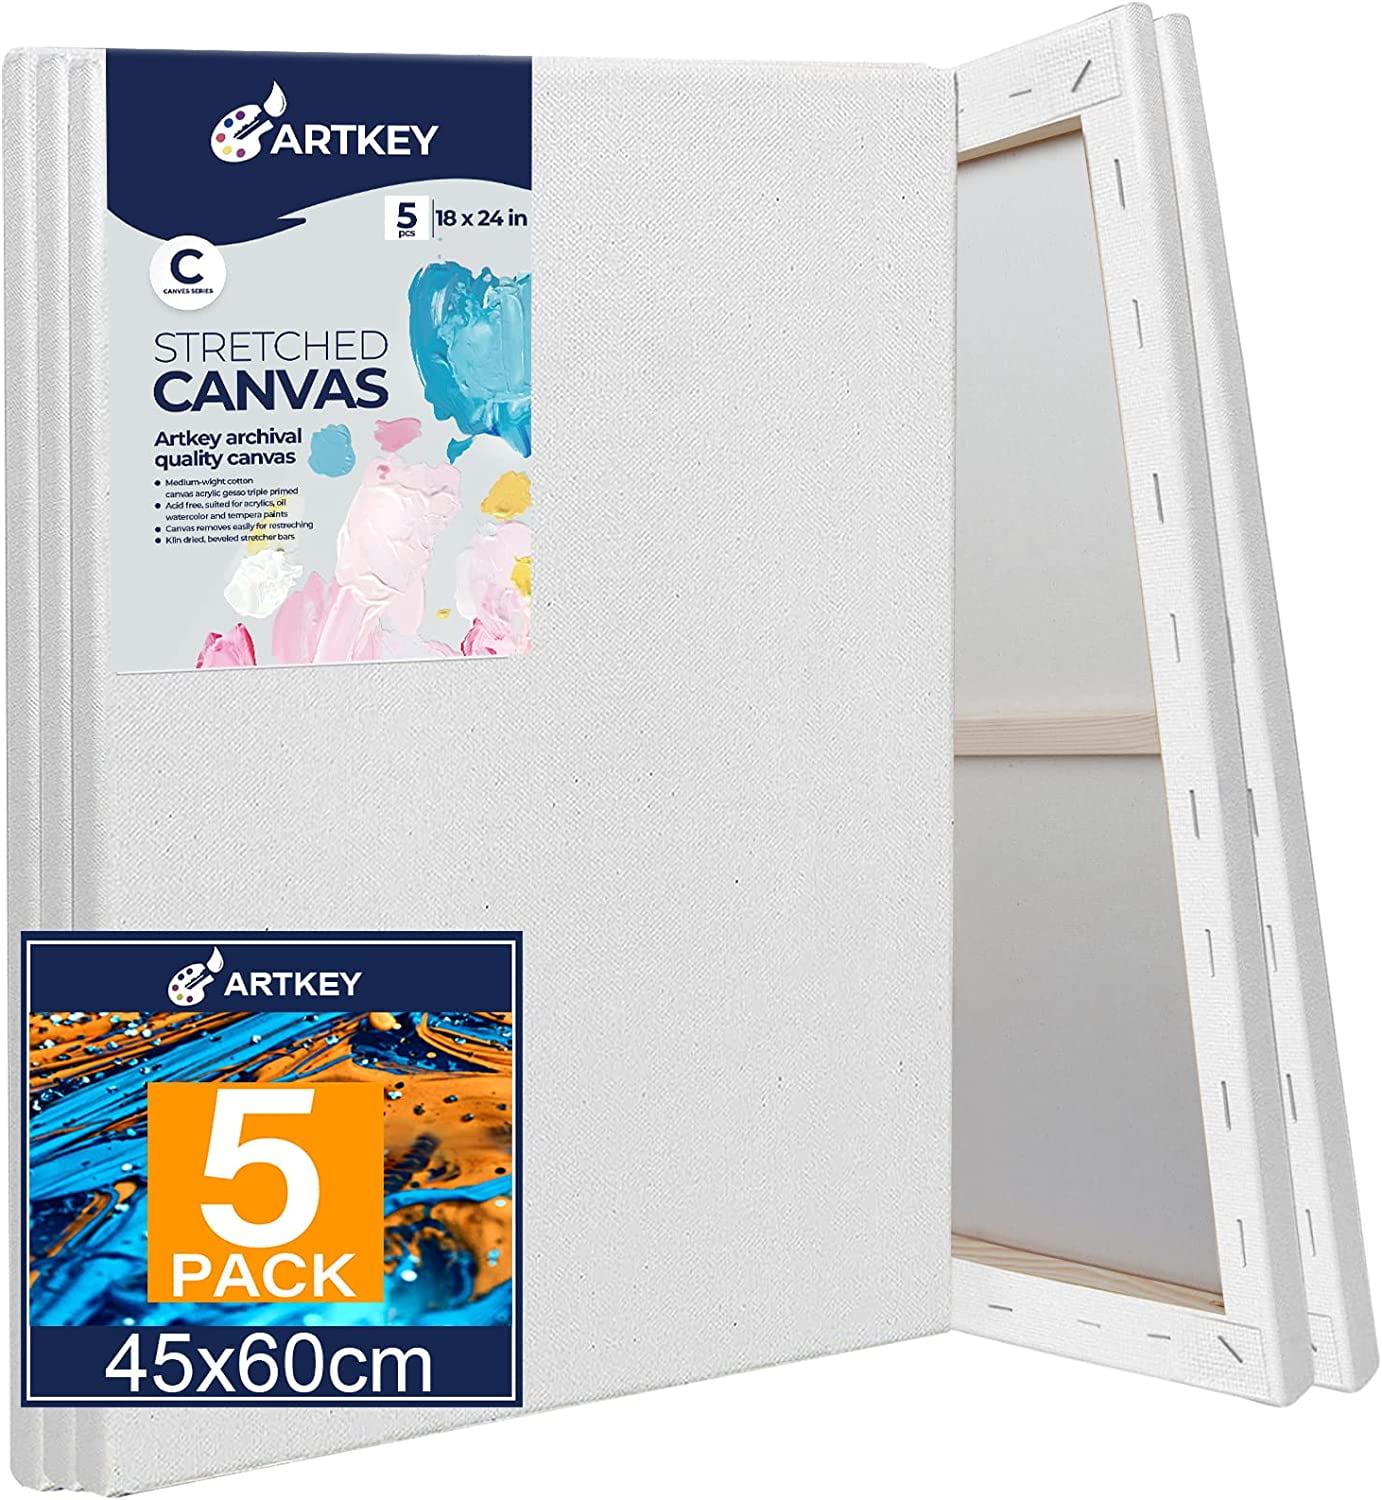 PHOENIX Watercolor Stretched Canvases, 11x14 Inch/4 Pack - 8 Oz, 3/4 Inch  Profile, 100% Cotton Triple Primed White Blank Canvases for Watercolor